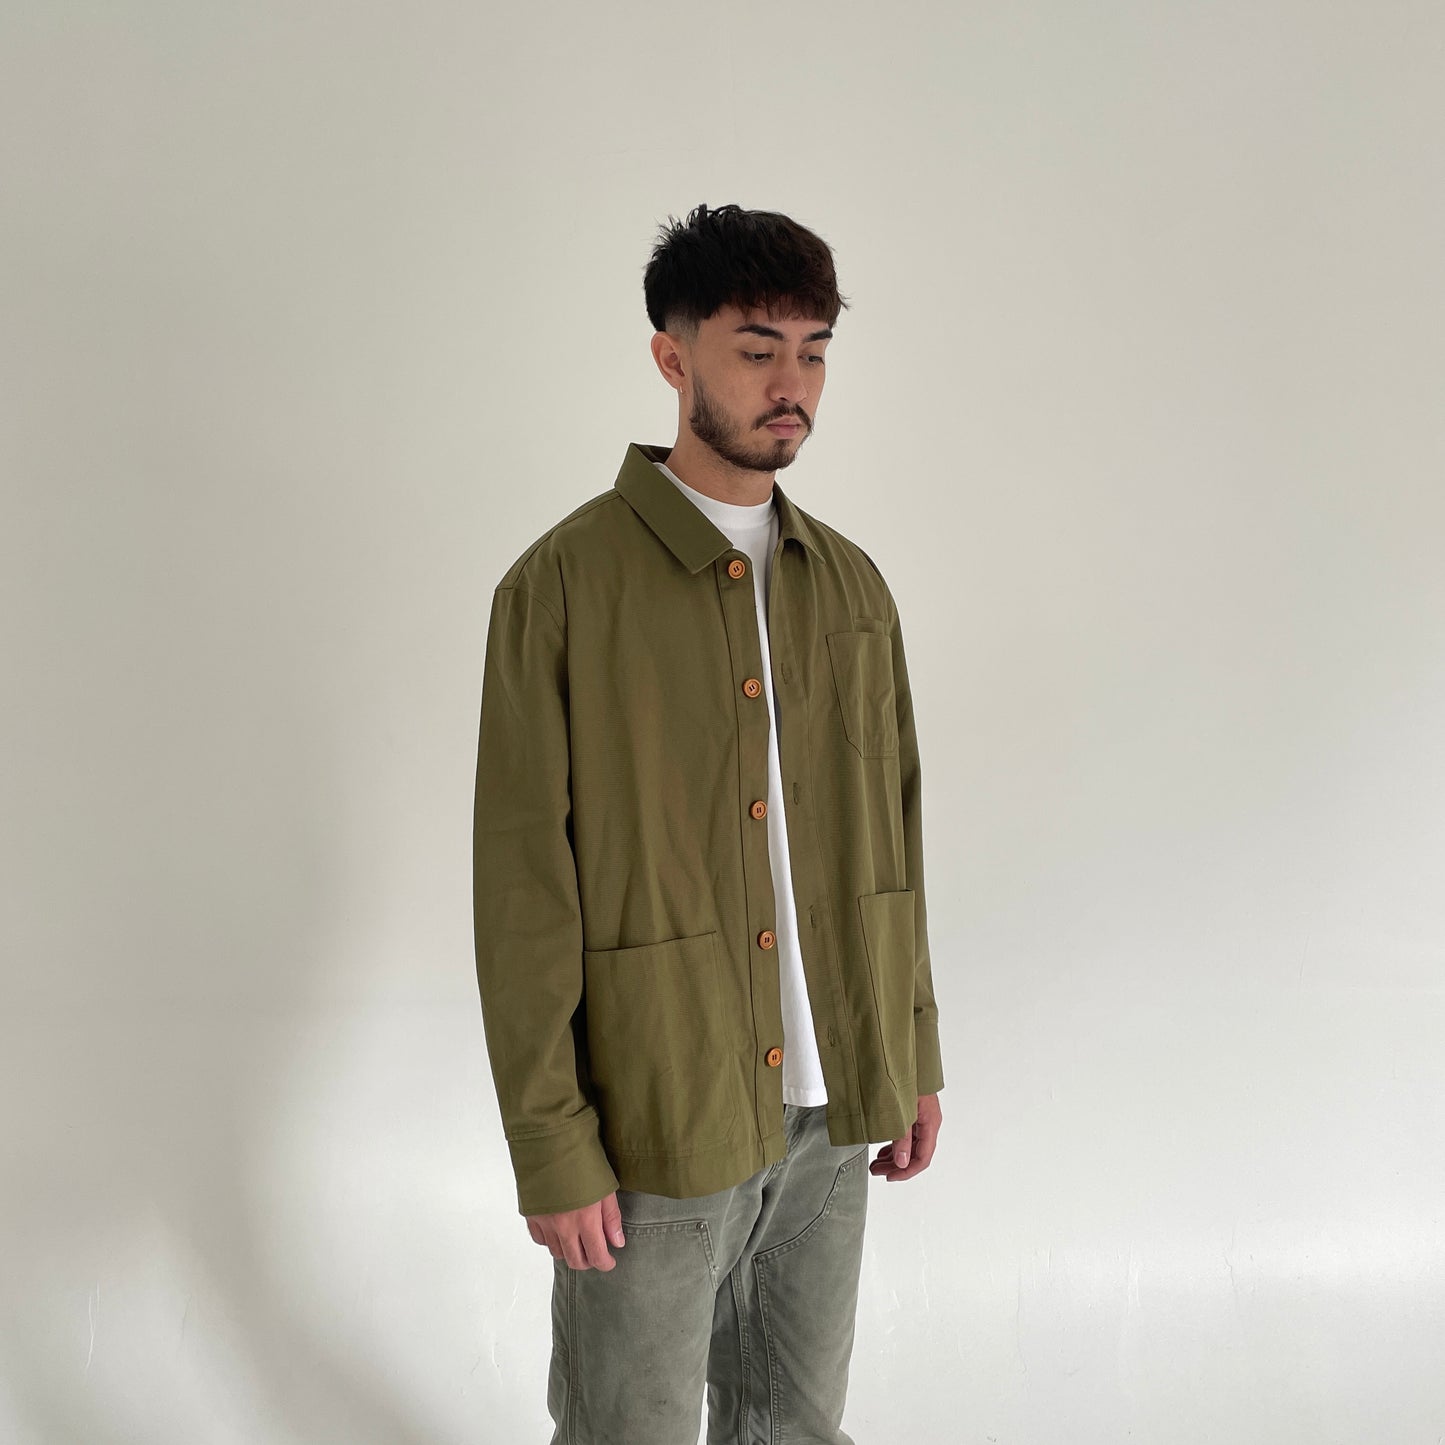 "The Wency" Work Overshirt - Army Green